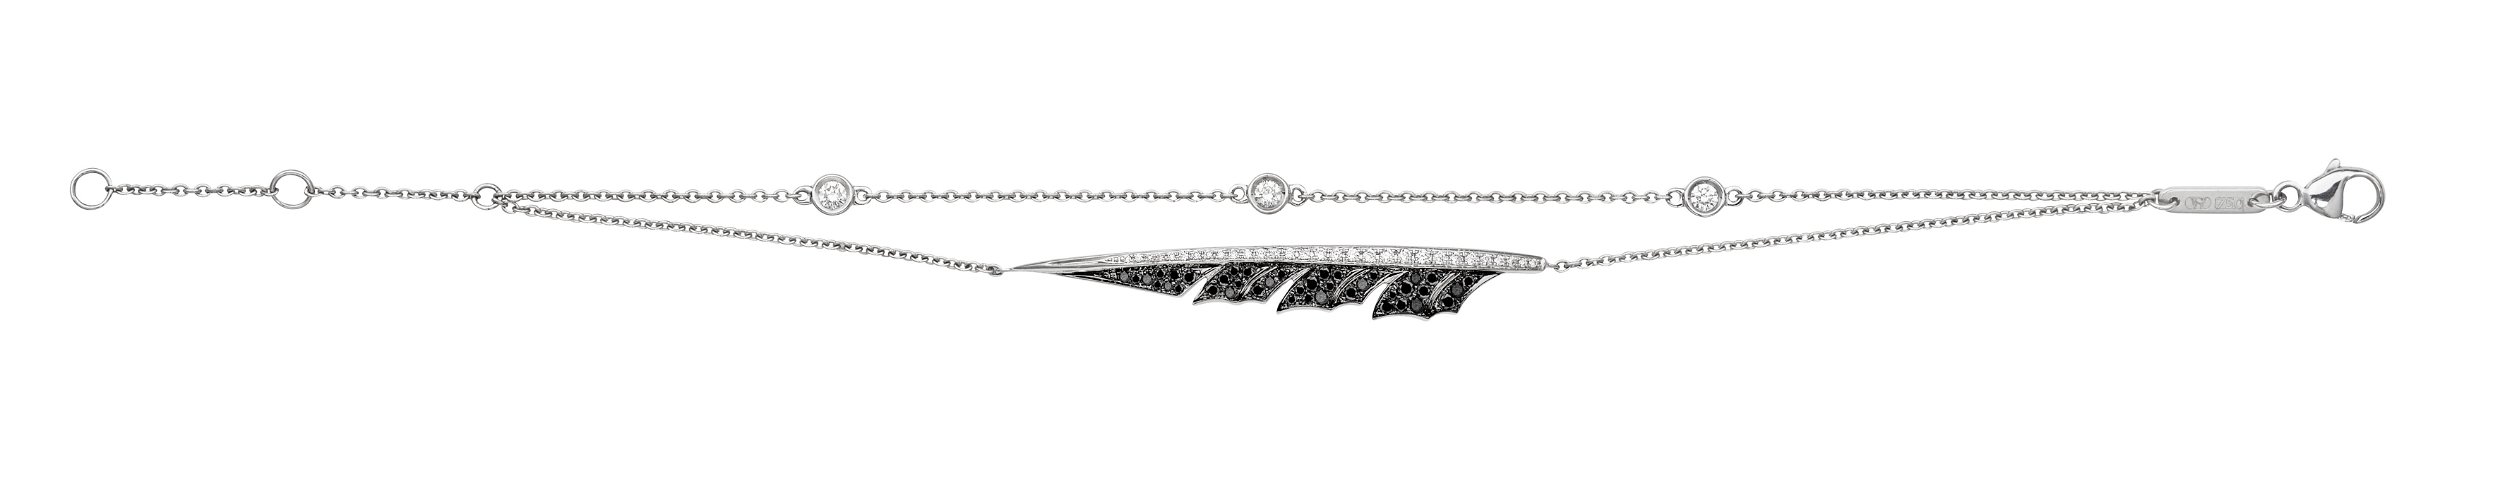 Magnipheasant Plume Chain Bracelet with Black and White Diamonds in 18kt White Gold